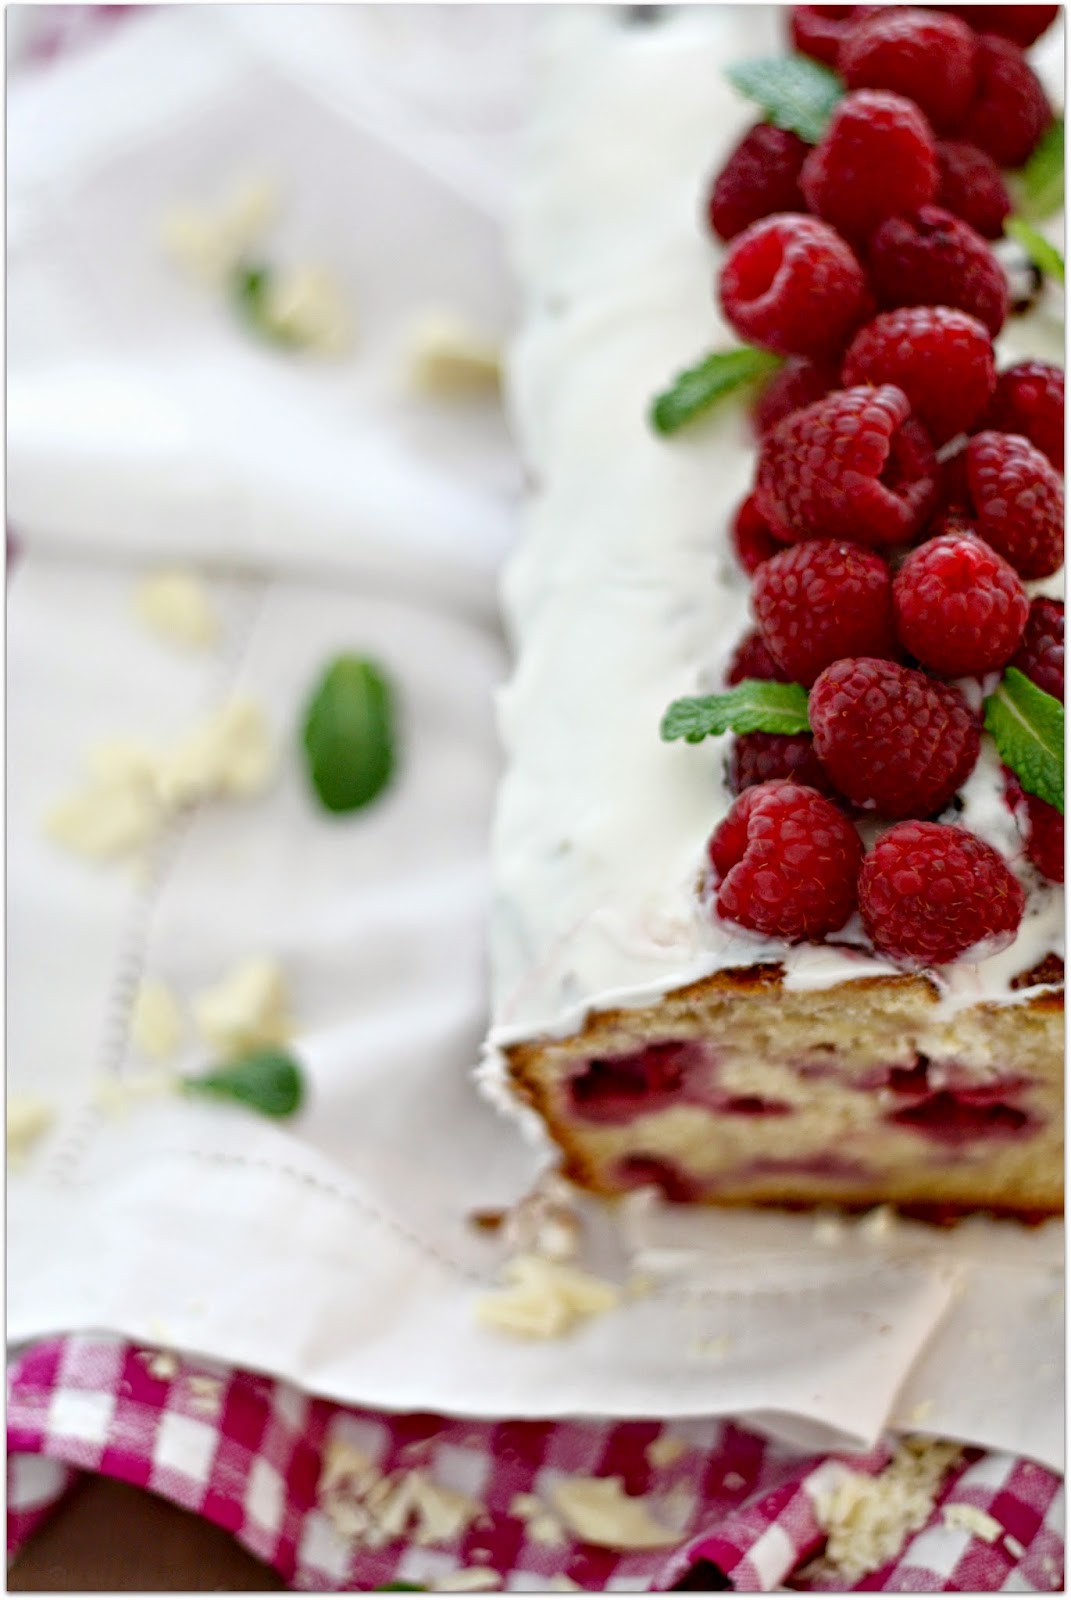 Bake a wish: Spring is in the air - Himbeer-Cheesecake mit weißer ...